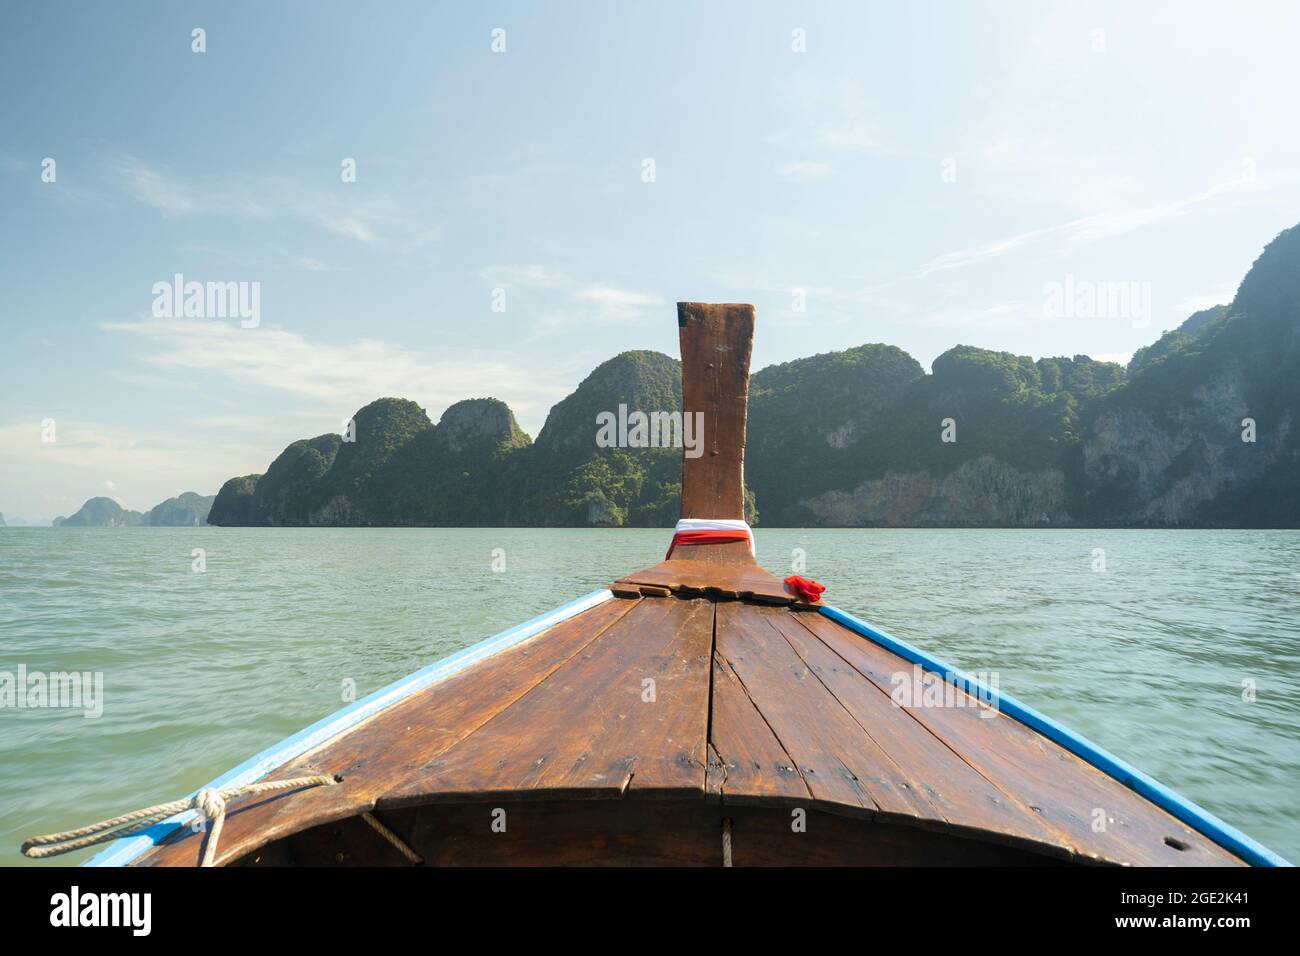 Scenic view of a wooden boat against Ao Phang-nga National Park in Kalai, Thailand Stock Photo